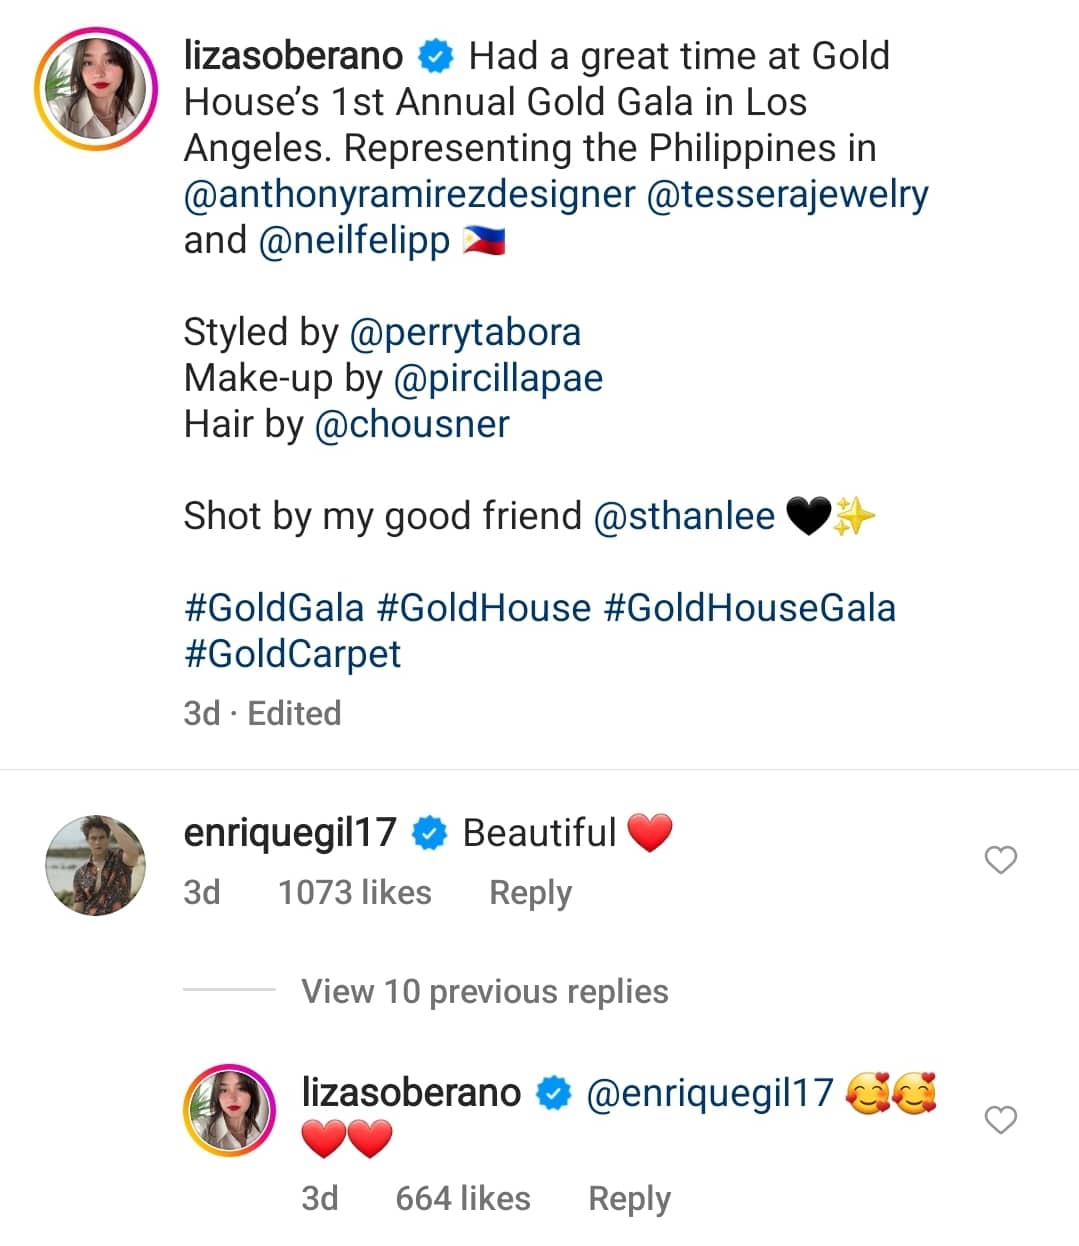 Enrique Gil and Liza Soberano exchange sweet comments on Instagram while apart